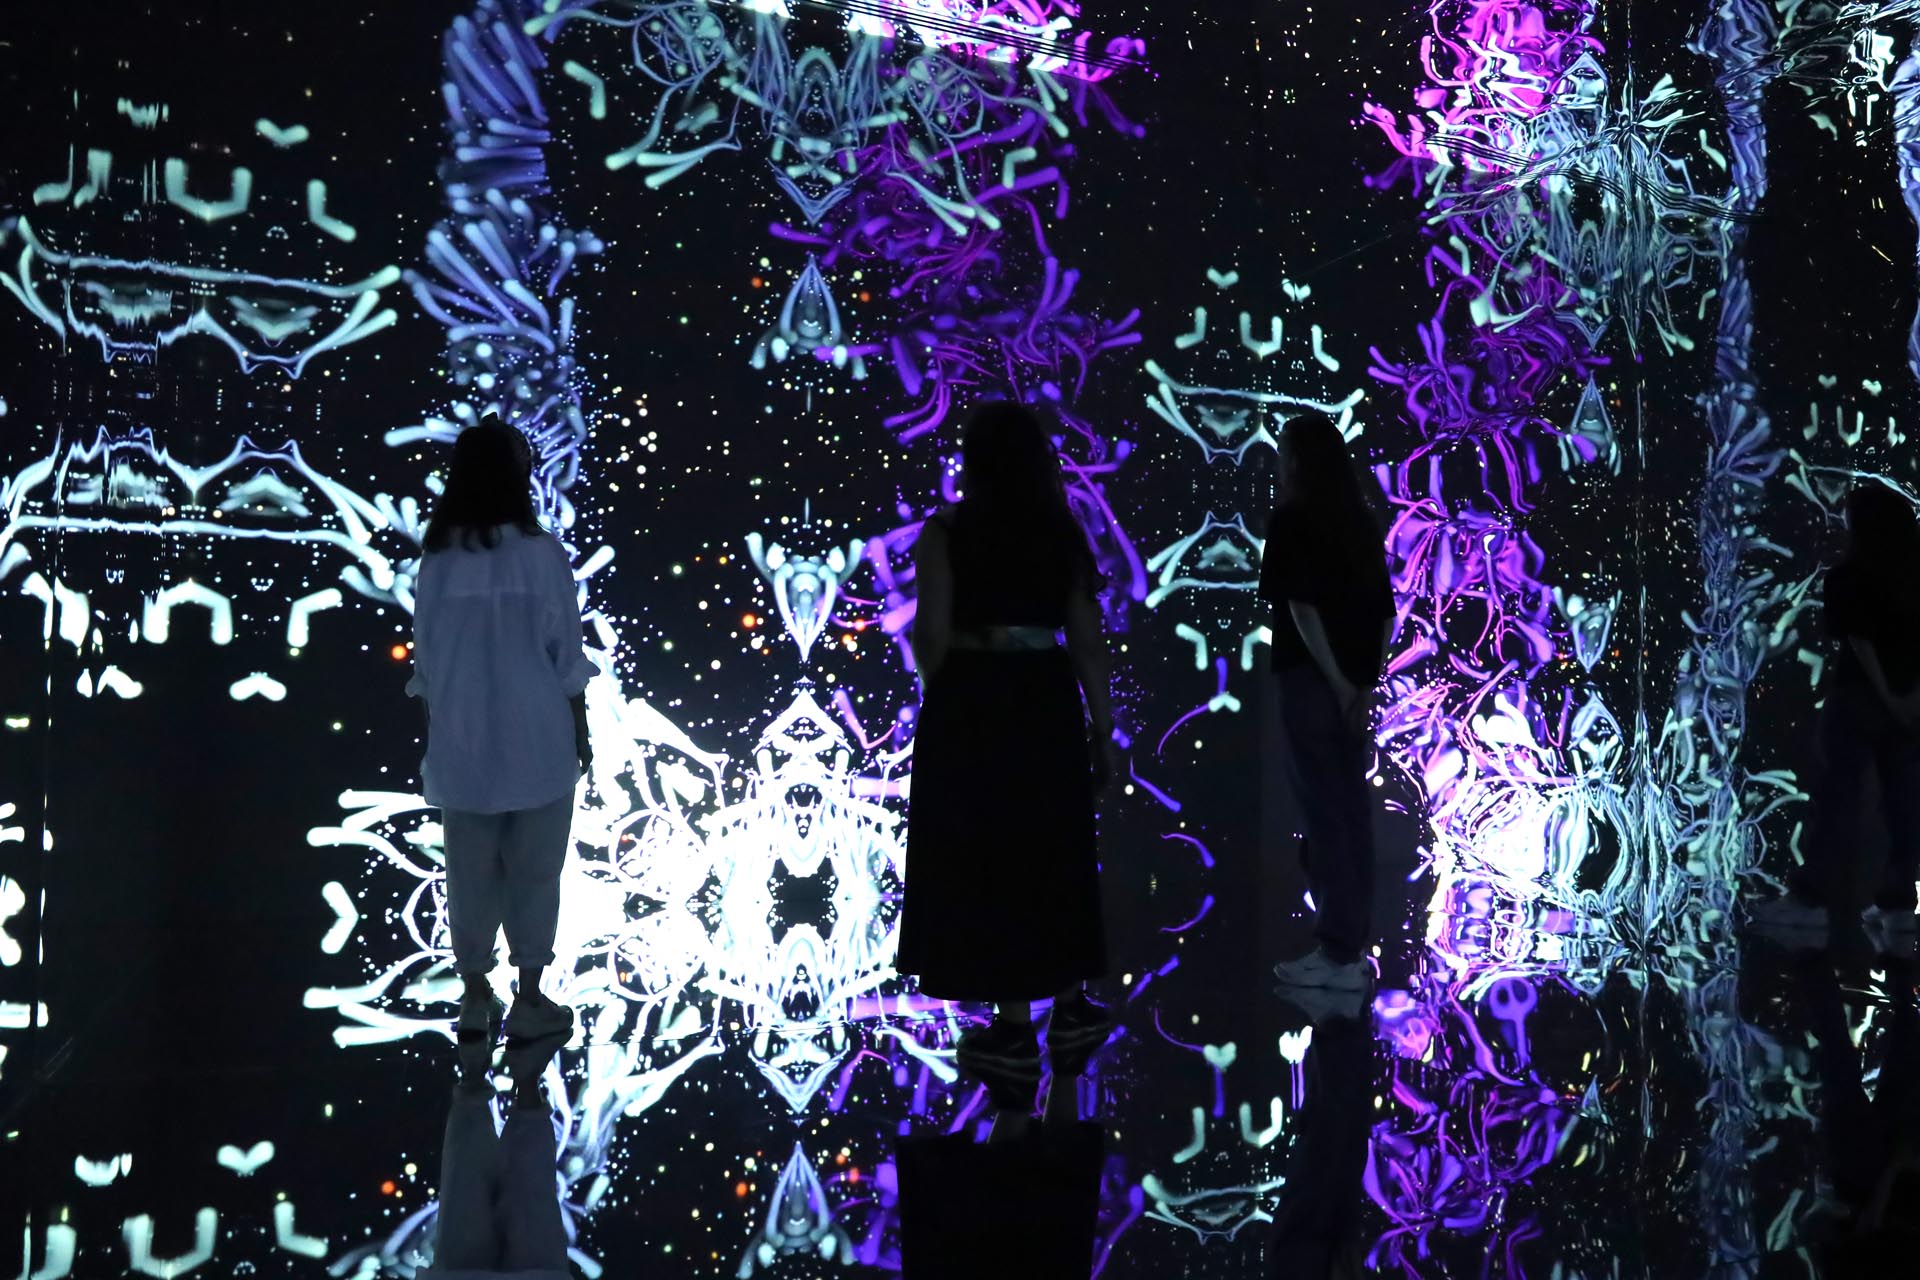 Illusionaries, a new immersive space at Canary Wharf